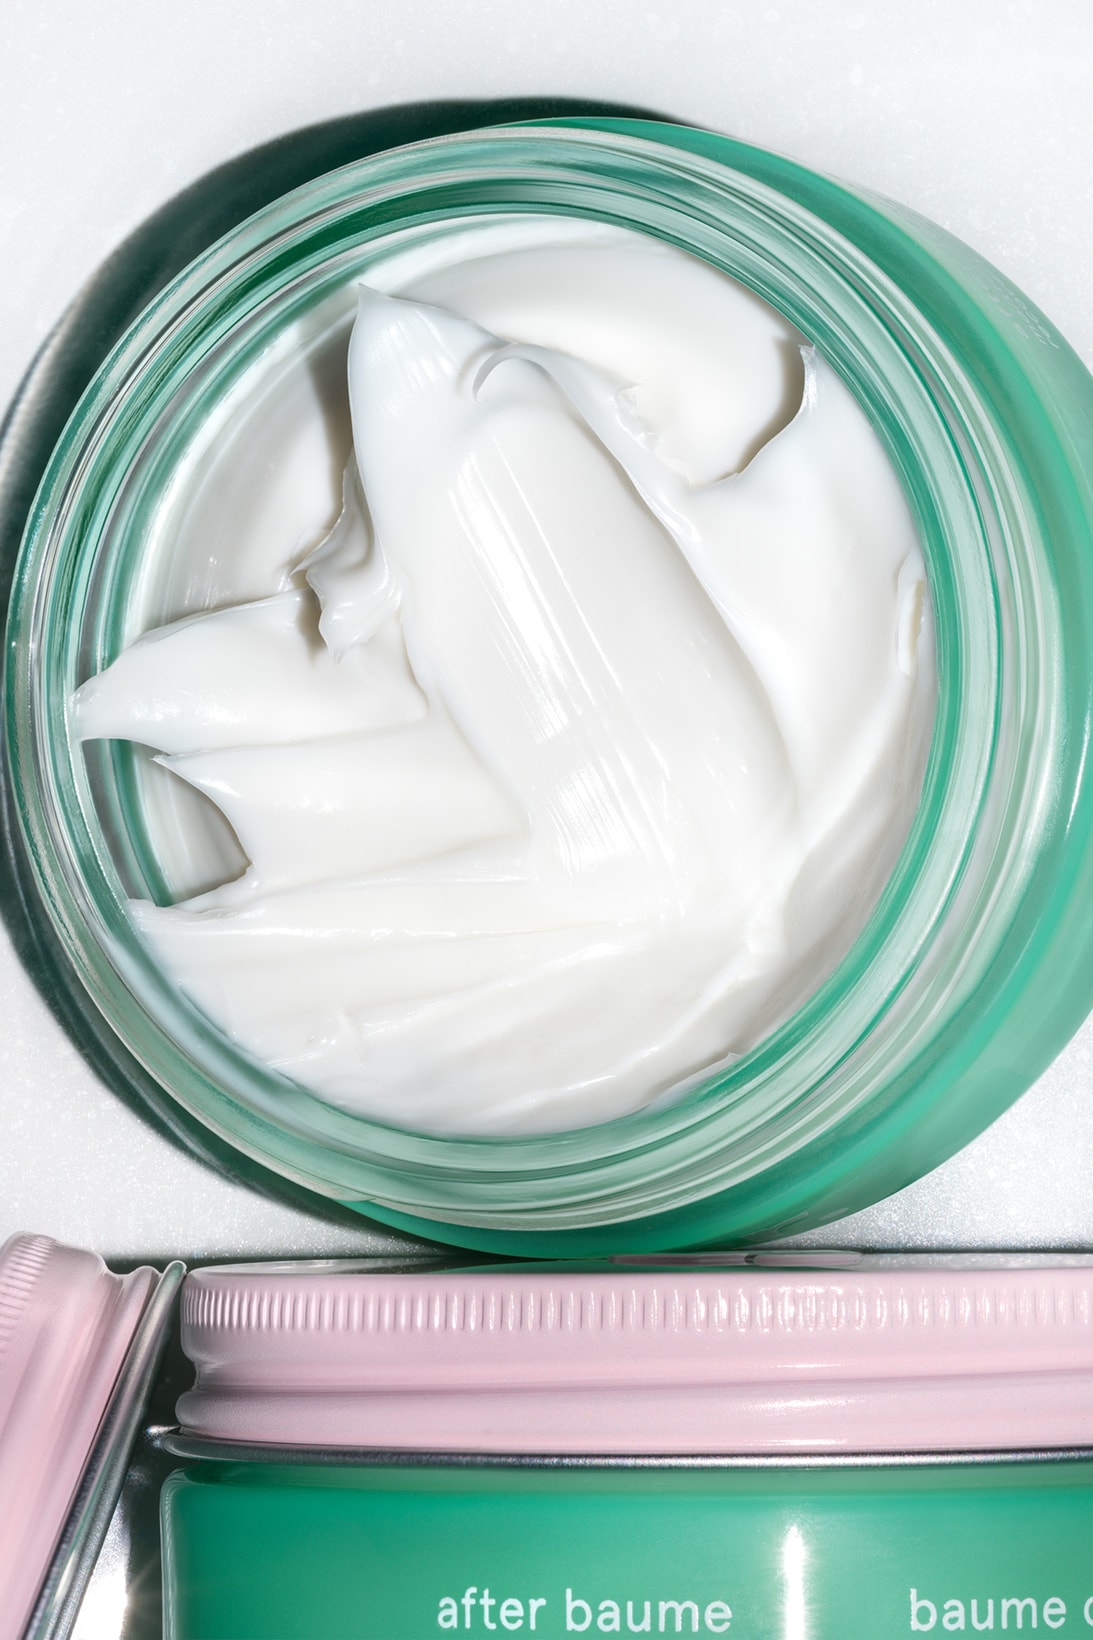 Glossier New After Baume Moisturizer Skincare Face Cream